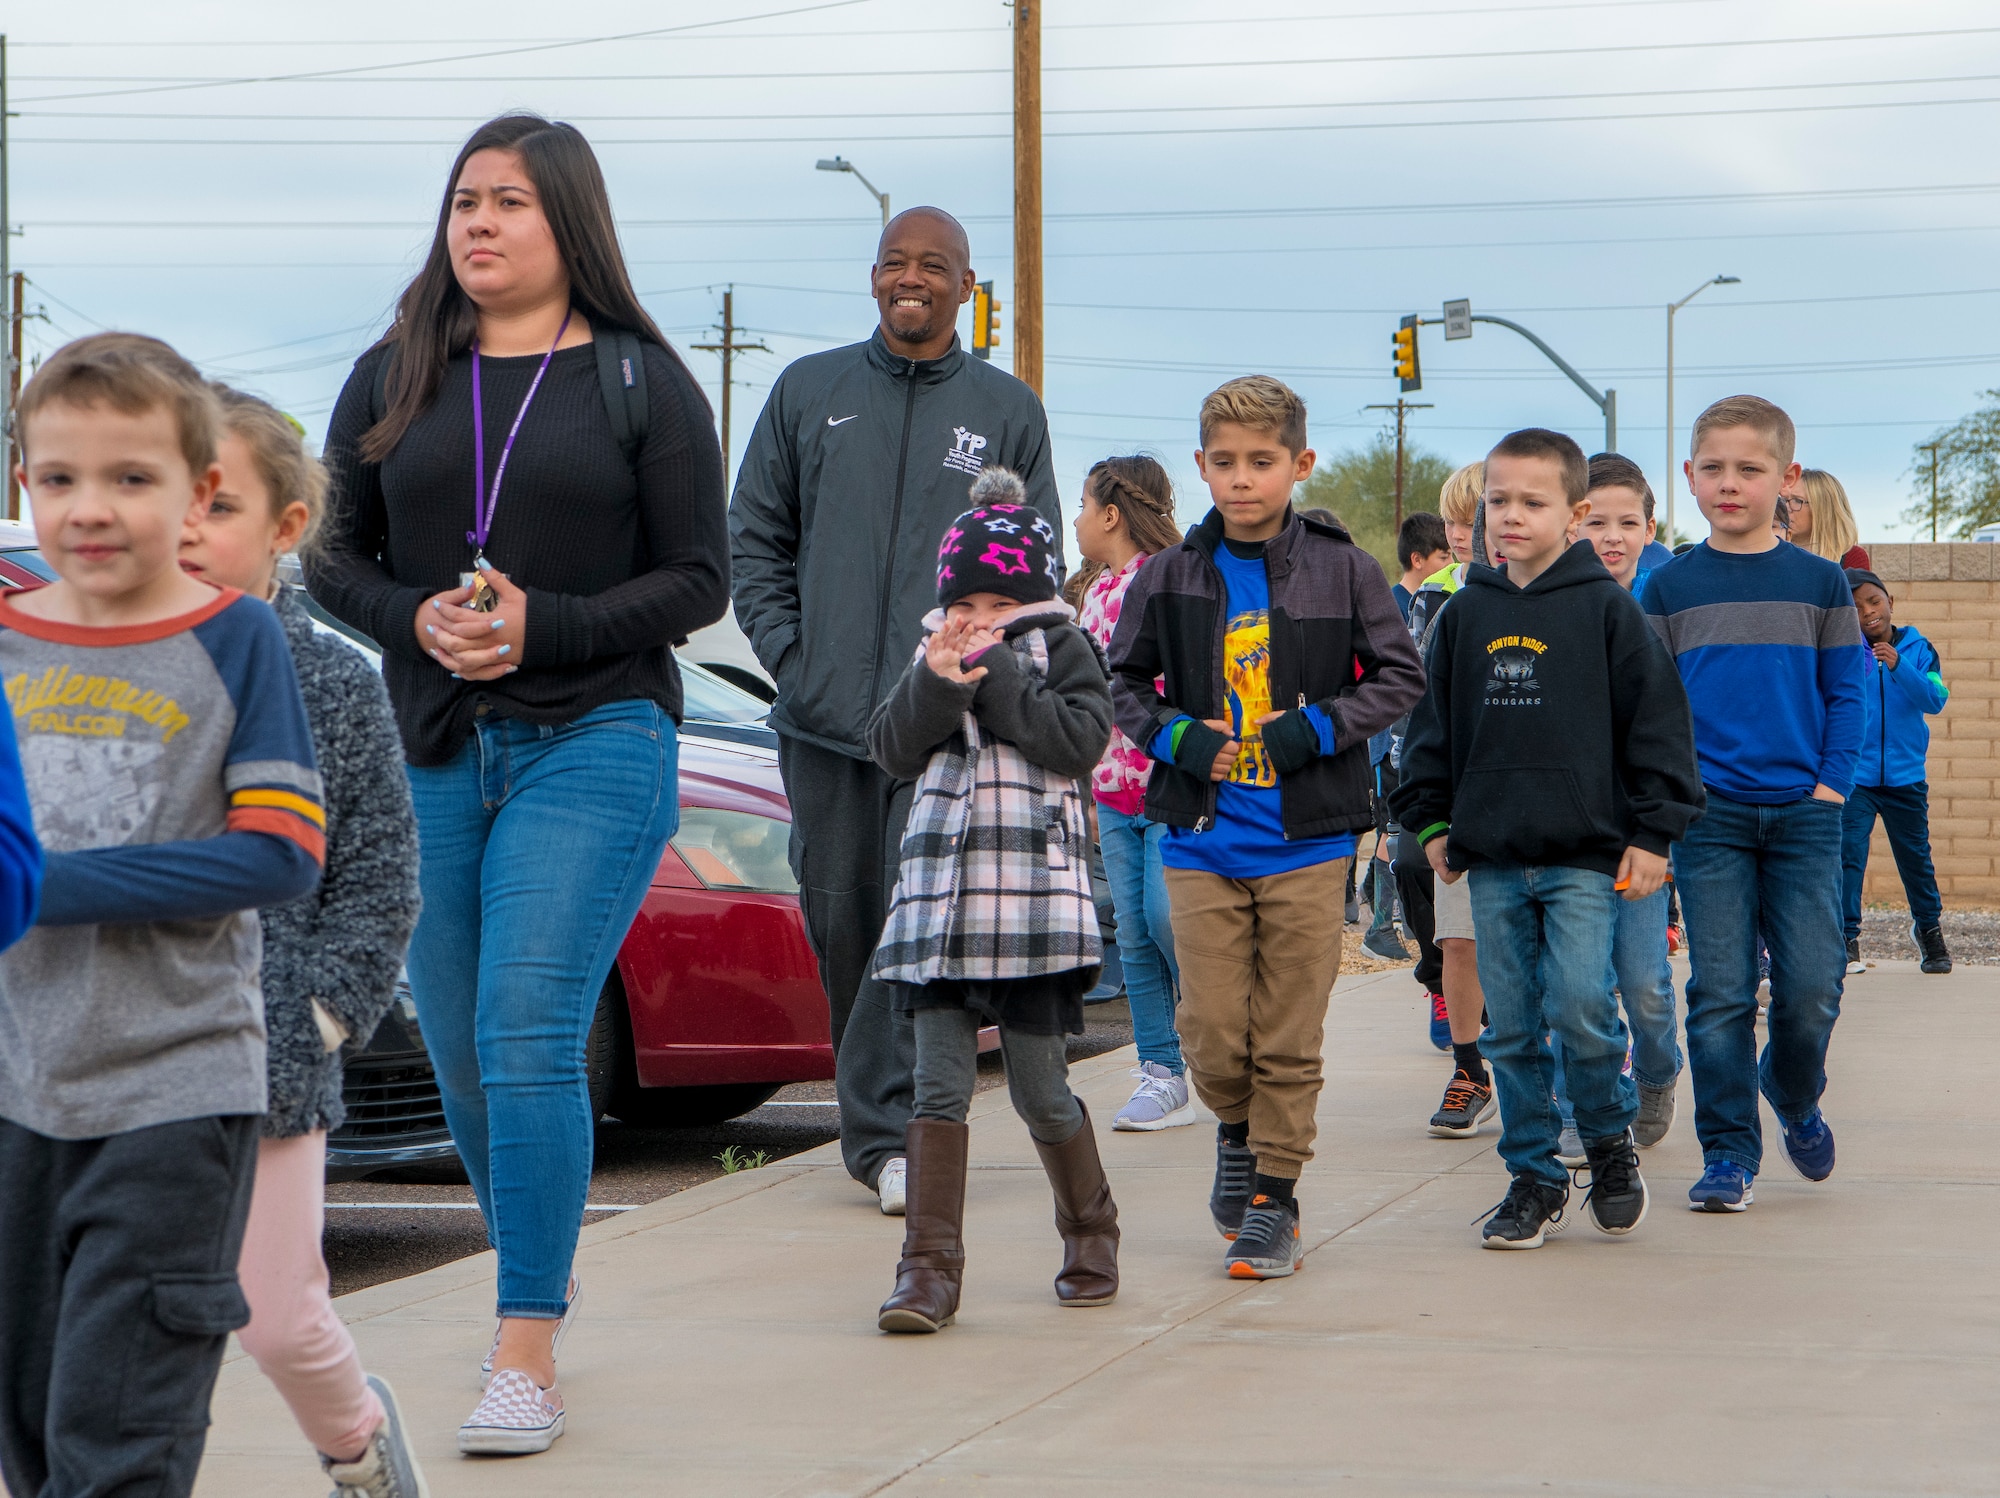 Students from Dysart Unified School District arrive at the Youth Center to attend the Winter Break Camp, Dec. 31, 2019, Luke Air Force Base, Ariz.